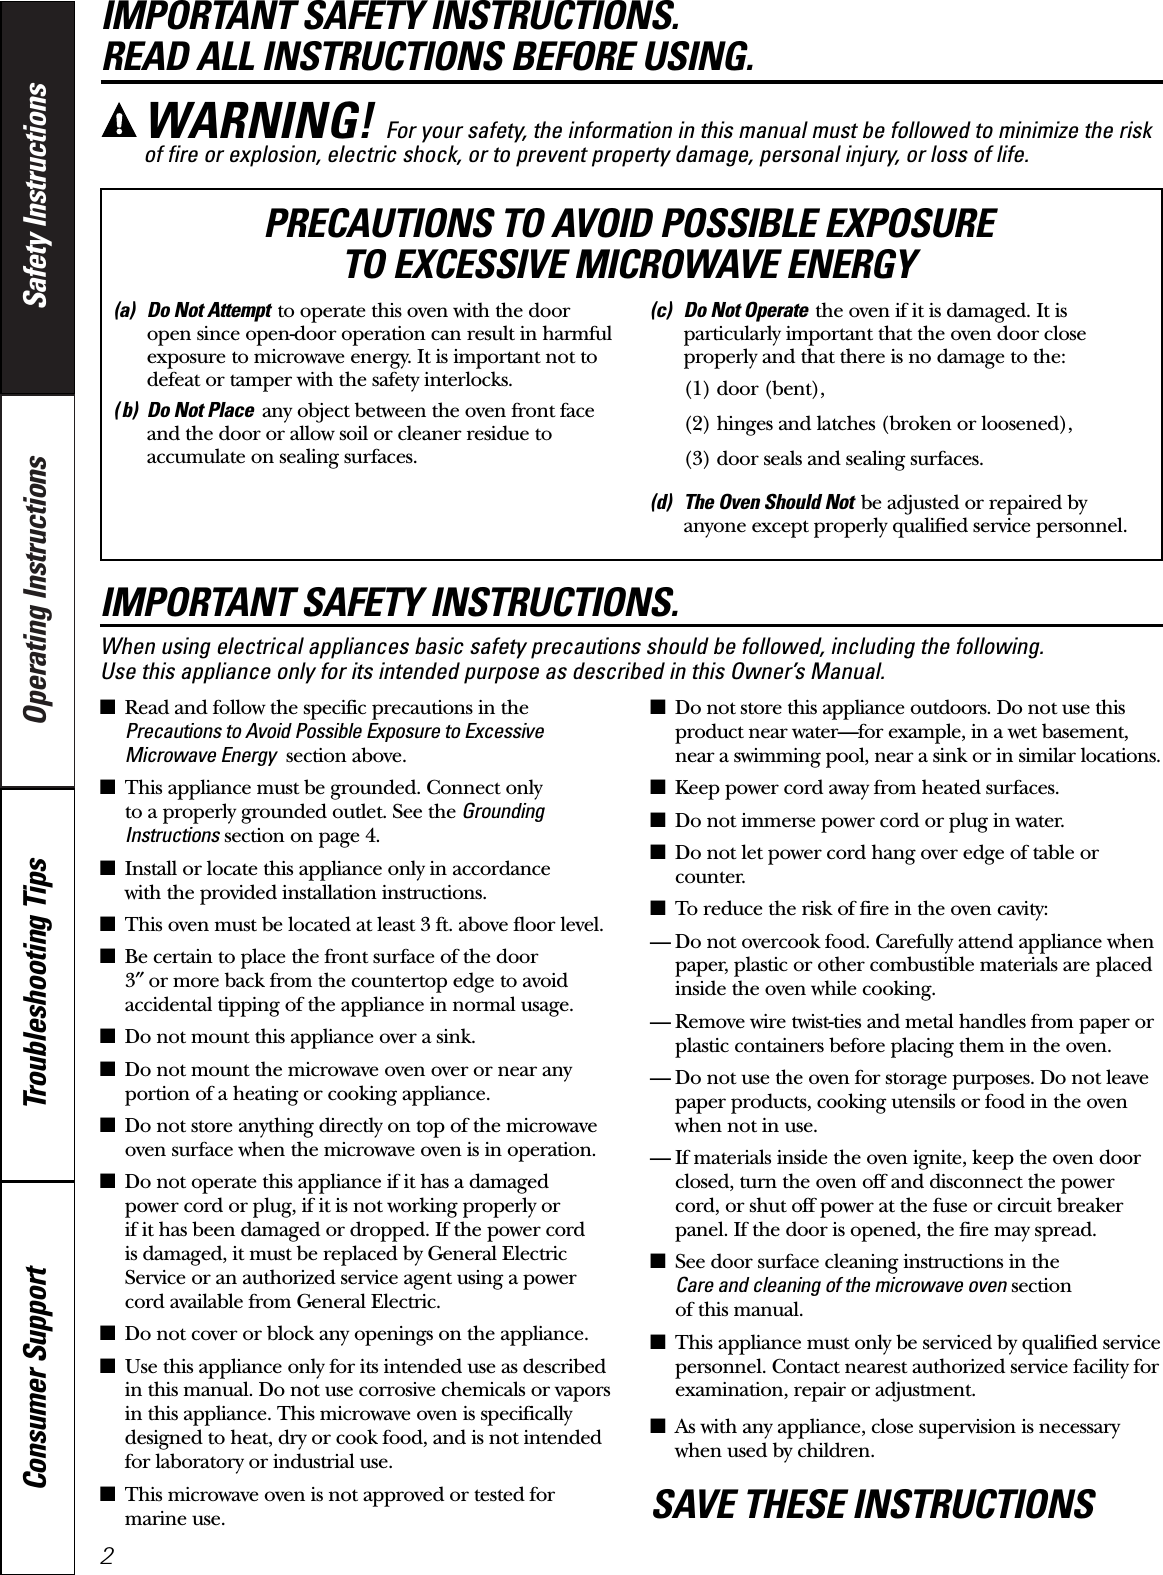 Operating Instructions Safety InstructionsConsumer Support Troubleshooting TipsIMPORTANT SAFETY INSTRUCTIONS. READ ALL INSTRUCTIONS BEFORE USING.IMPORTANT SAFETY INSTRUCTIONS.When using electrical appliances basic safety precautions should be followed, including the following. Use this appliance only for its intended purpose as described in this Owner’s Manual.■Read and follow the specific precautions in thePrecautions to Avoid Possible Exposure to ExcessiveMicrowave Energy section above.■This appliance must be grounded. Connect only to a properly grounded outlet. See the GroundingInstructions section on page 4.■Install or locate this appliance only in accordance with the provided installation instructions.■This oven must be located at least 3 ft. above floor level.■Be certain to place the front surface of the door 3″or more back from the countertop edge to avoidaccidental tipping of the appliance in normal usage.■Do not mount this appliance over a sink. ■Do not mount the microwave oven over or near anyportion of a heating or cooking appliance.■Do not store anything directly on top of the microwaveoven surface when the microwave oven is in operation.■Do not operate this appliance if it has a damaged power cord or plug, if it is not working properly or if it has been damaged or dropped. If the power cord is damaged, it must be replaced by General ElectricService or an authorized service agent using a powercord available from General Electric.■Do not cover or block any openings on the appliance.■Use this appliance only for its intended use as describedin this manual. Do not use corrosive chemicals or vaporsin this appliance. This microwave oven is specificallydesigned to heat, dry or cook food, and is not intendedfor laboratory or industrial use.■This microwave oven is not approved or tested formarine use.■Do not store this appliance outdoors. Do not use thisproduct near water—for example, in a wet basement,near a swimming pool, near a sink or in similar locations.■Keep power cord away from heated surfaces.■Do not immerse power cord or plug in water.■Do not let power cord hang over edge of table orcounter. ■To reduce the risk of fire in the oven cavity:— Do not overcook food. Carefully attend appliance whenpaper, plastic or other combustible materials are placedinside the oven while cooking.— Remove wire twist-ties and metal handles from paper orplastic containers before placing them in the oven.— Do not use the oven for storage purposes. Do not leavepaper products, cooking utensils or food in the ovenwhen not in use.— If materials inside the oven ignite, keep the oven doorclosed, turn the oven off and disconnect the powercord, or shut off power at the fuse or circuit breakerpanel. If the door is opened, the fire may spread.■See door surface cleaning instructions in the Care and cleaning of the microwave oven section of this manual.■This appliance must only be serviced by qualified servicepersonnel. Contact nearest authorized service facility forexamination, repair or adjustment.■As with any appliance, close supervision is necessarywhen used by children.SAVE THESE INSTRUCTIONSWARNING! For your safety, the information in this manual must be followed to minimize the riskof fire or explosion, electric shock, or to prevent property damage, personal injury, or loss of life.(a) Do Not Attempt to operate this oven with the dooropen since open-door operation can result in harmfulexposure to microwave energy. It is important not todefeat or tamper with the safety interlocks.( b) Do Not Place any object between the oven front faceand the door or allow soil or cleaner residue toaccumulate on sealing surfaces.(c) Do Not Operate the oven if it is damaged. It isparticularly important that the oven door closeproperly and that there is no damage to the:(1) door (bent),(2) hinges and latches (broken or loosened),(3) door seals and sealing surfaces.(d) The Oven Should Not be adjusted or repaired byanyone except properly qualified service personnel.PRECAUTIONS TO AVOID POSSIBLE EXPOSURE TO EXCESSIVE MICROWAVE ENERGY2